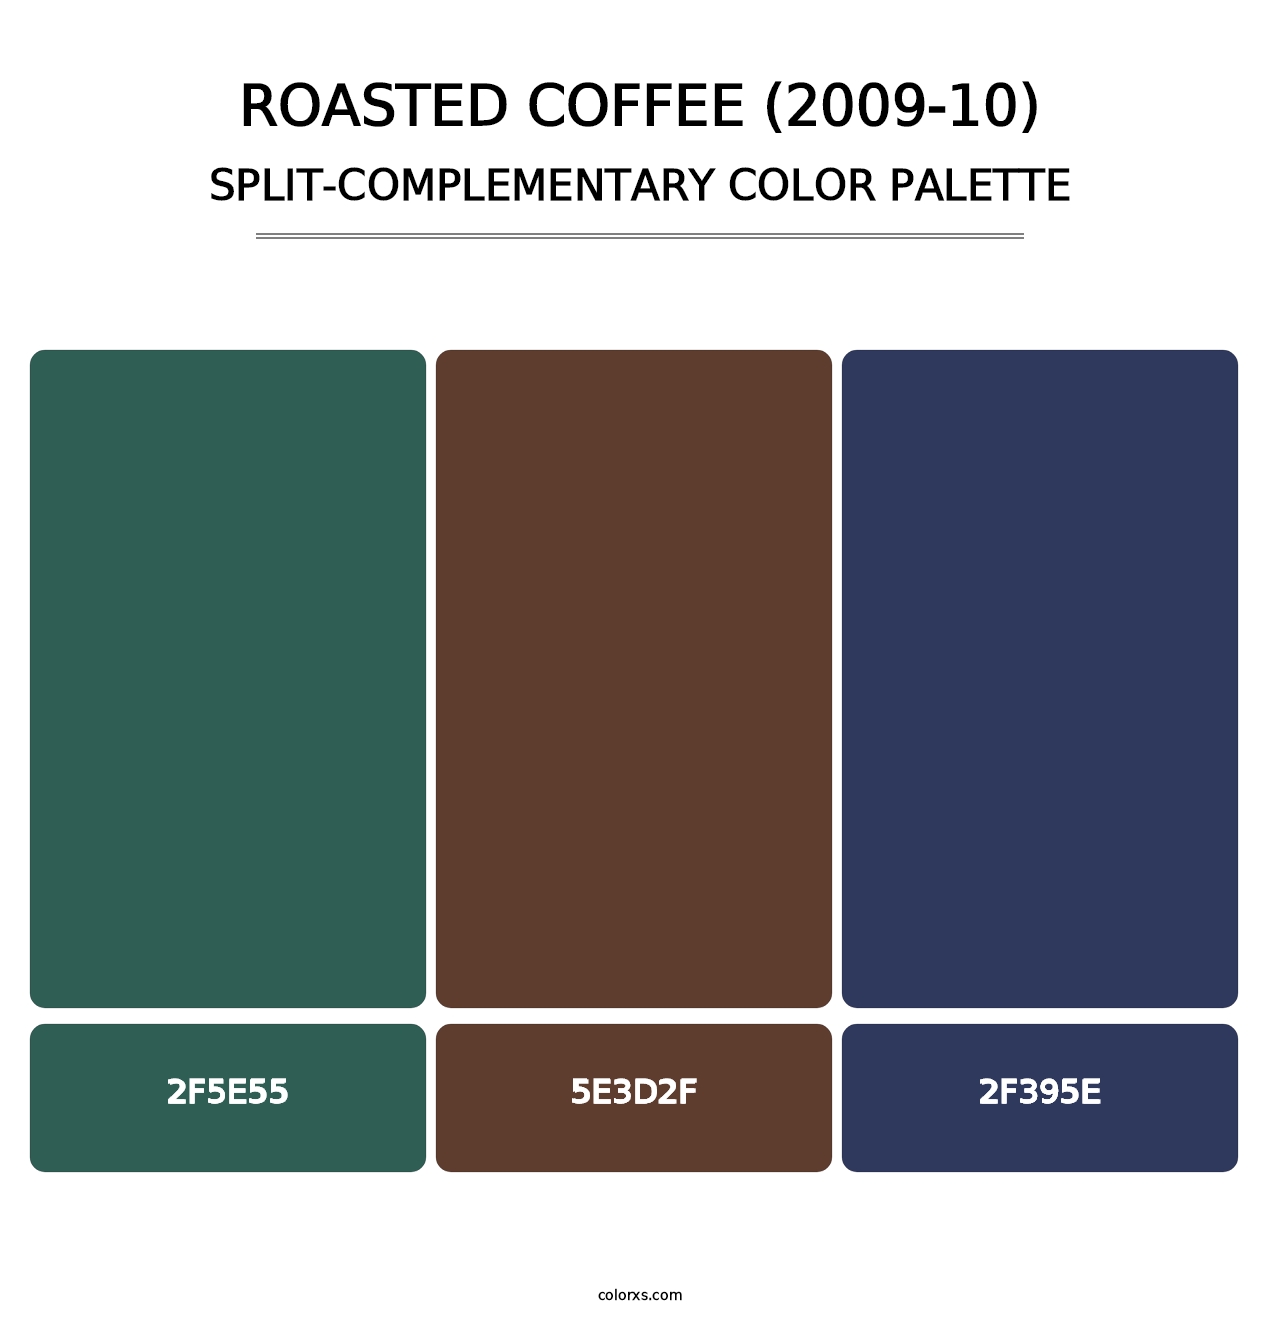 Roasted Coffee (2009-10) - Split-Complementary Color Palette